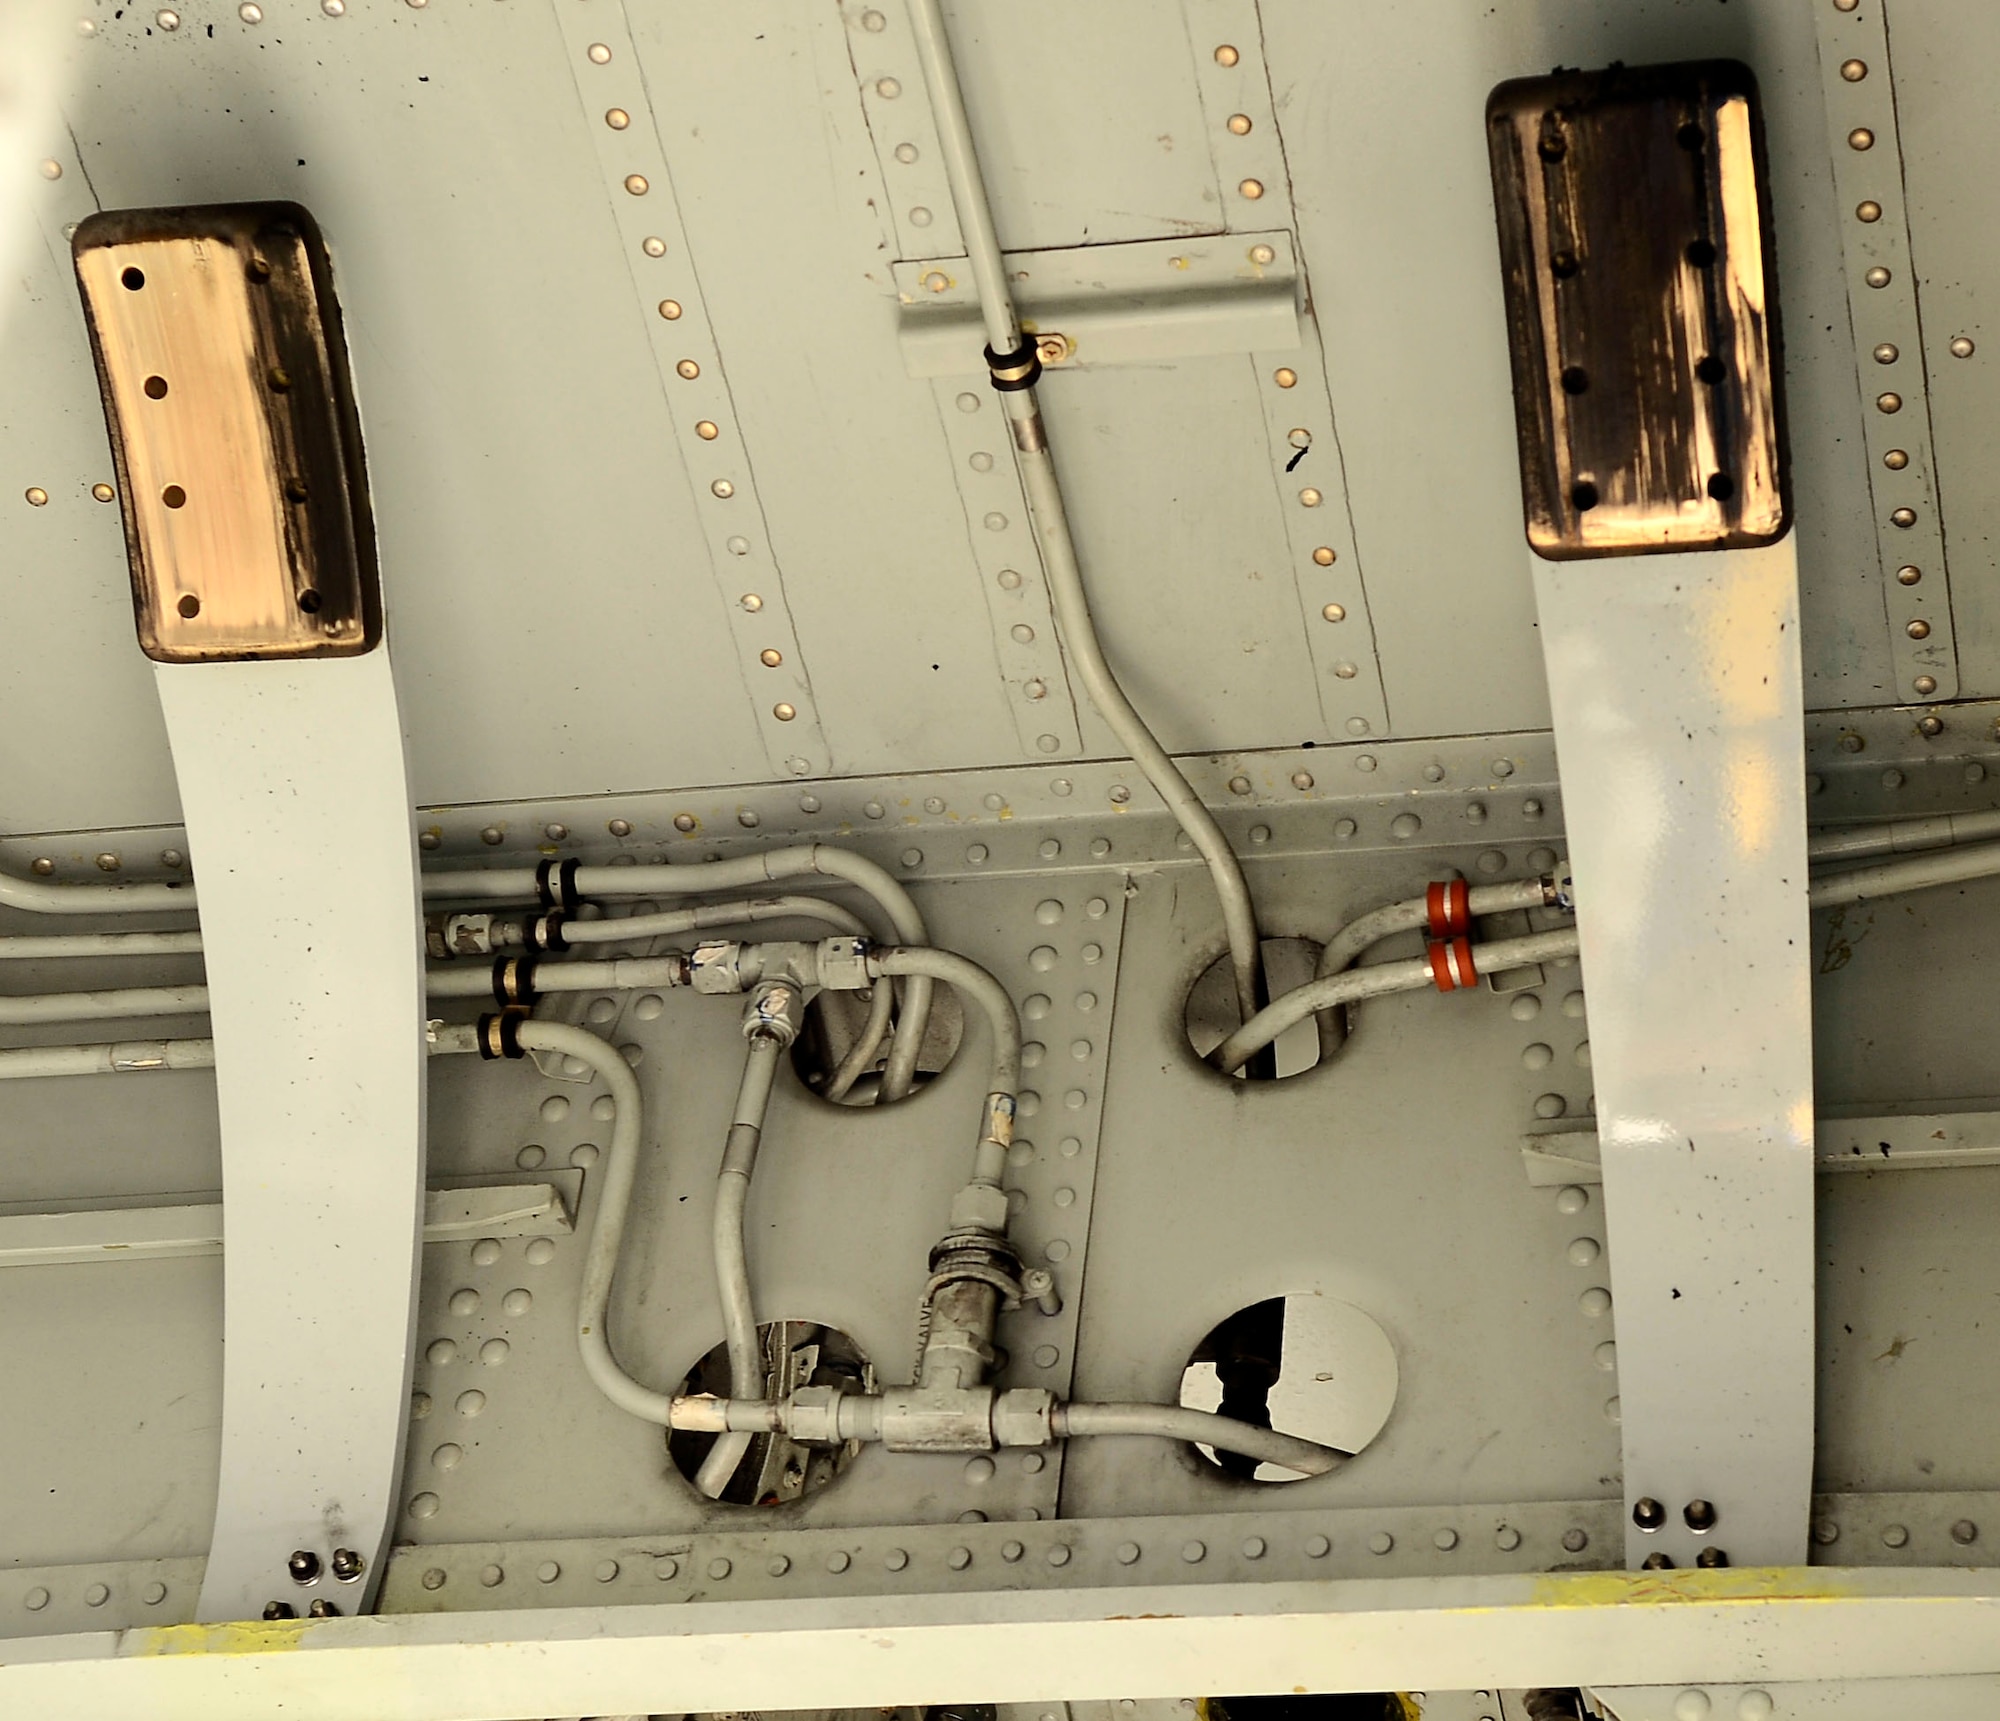 Two snubber brakes sit on a KC-135 Stratotanker Aug. 12, 2014, at MacDill Air Force Base, Fla. The snubber brake system consists of two brake linings attached to two spring arms, which contact the nose landing gear tires after gear retraction to eliminate noise and vibration. (U.S. Air Force photo/Airman 1st Class Tori Schultz)